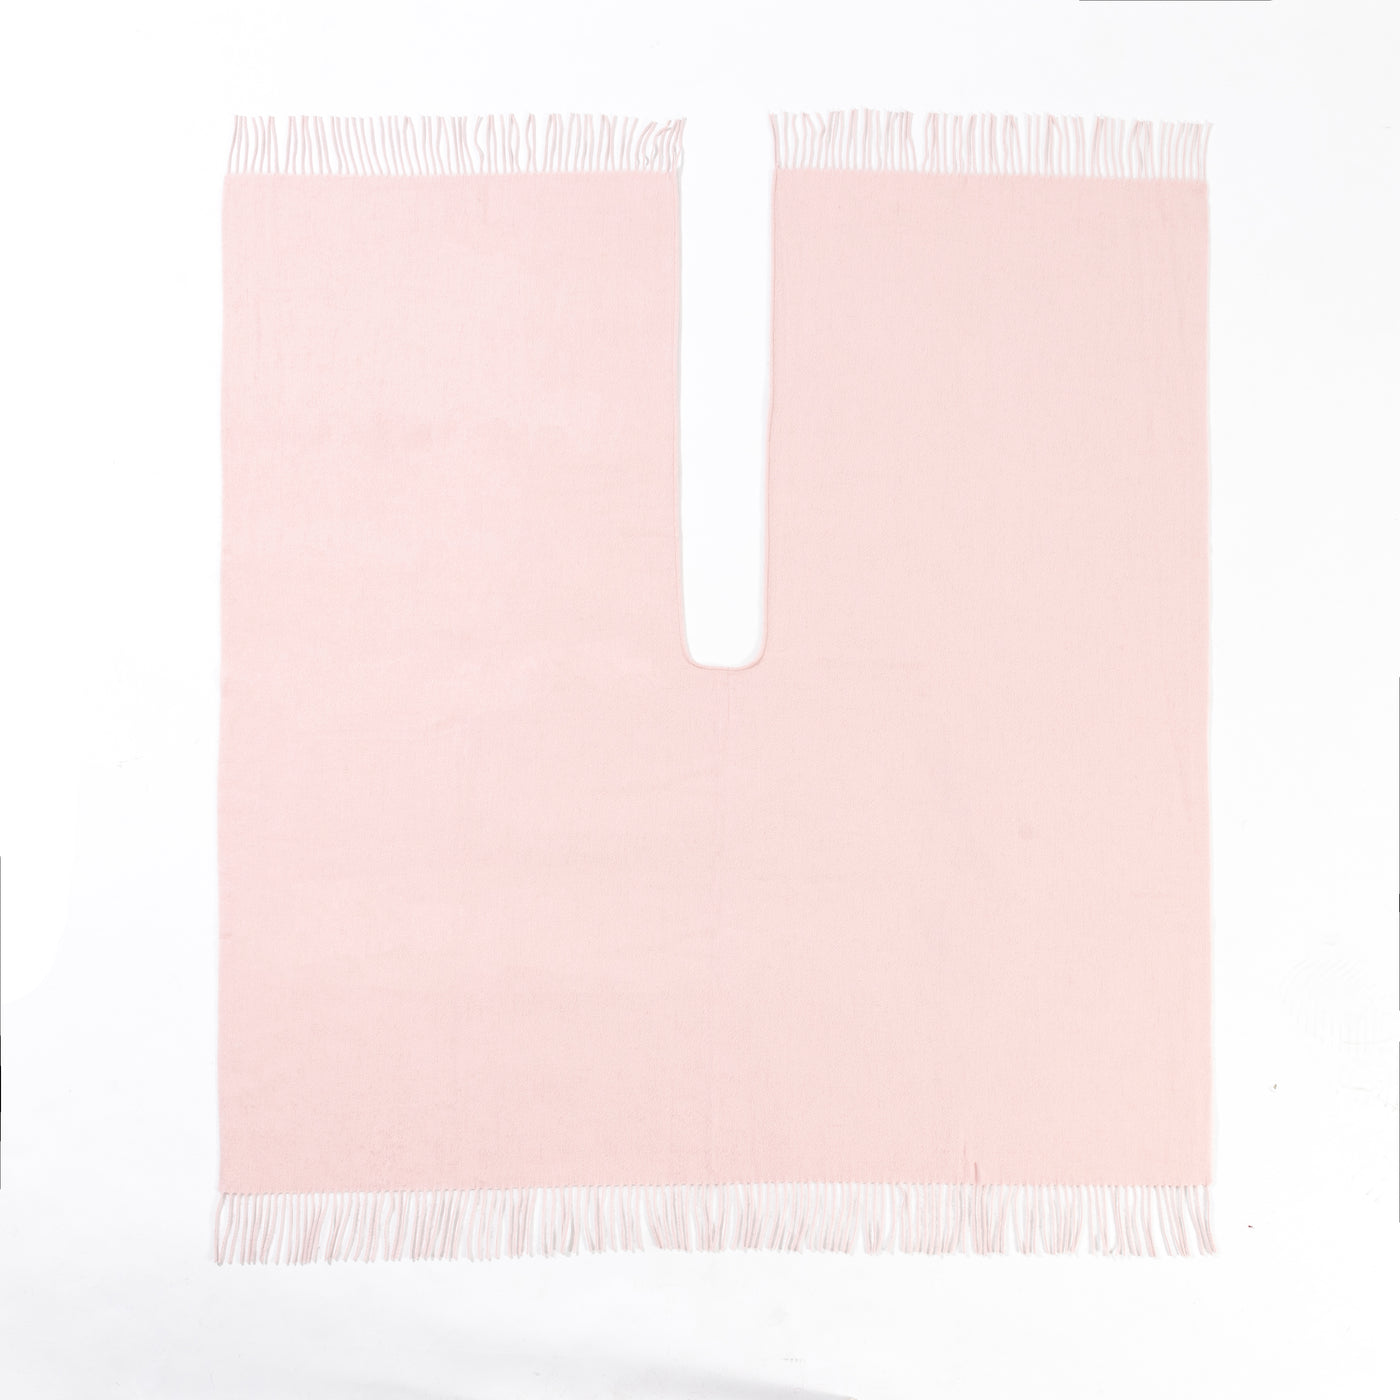 Plain Cape Light Pink Poncho 100% Pure Lambswool